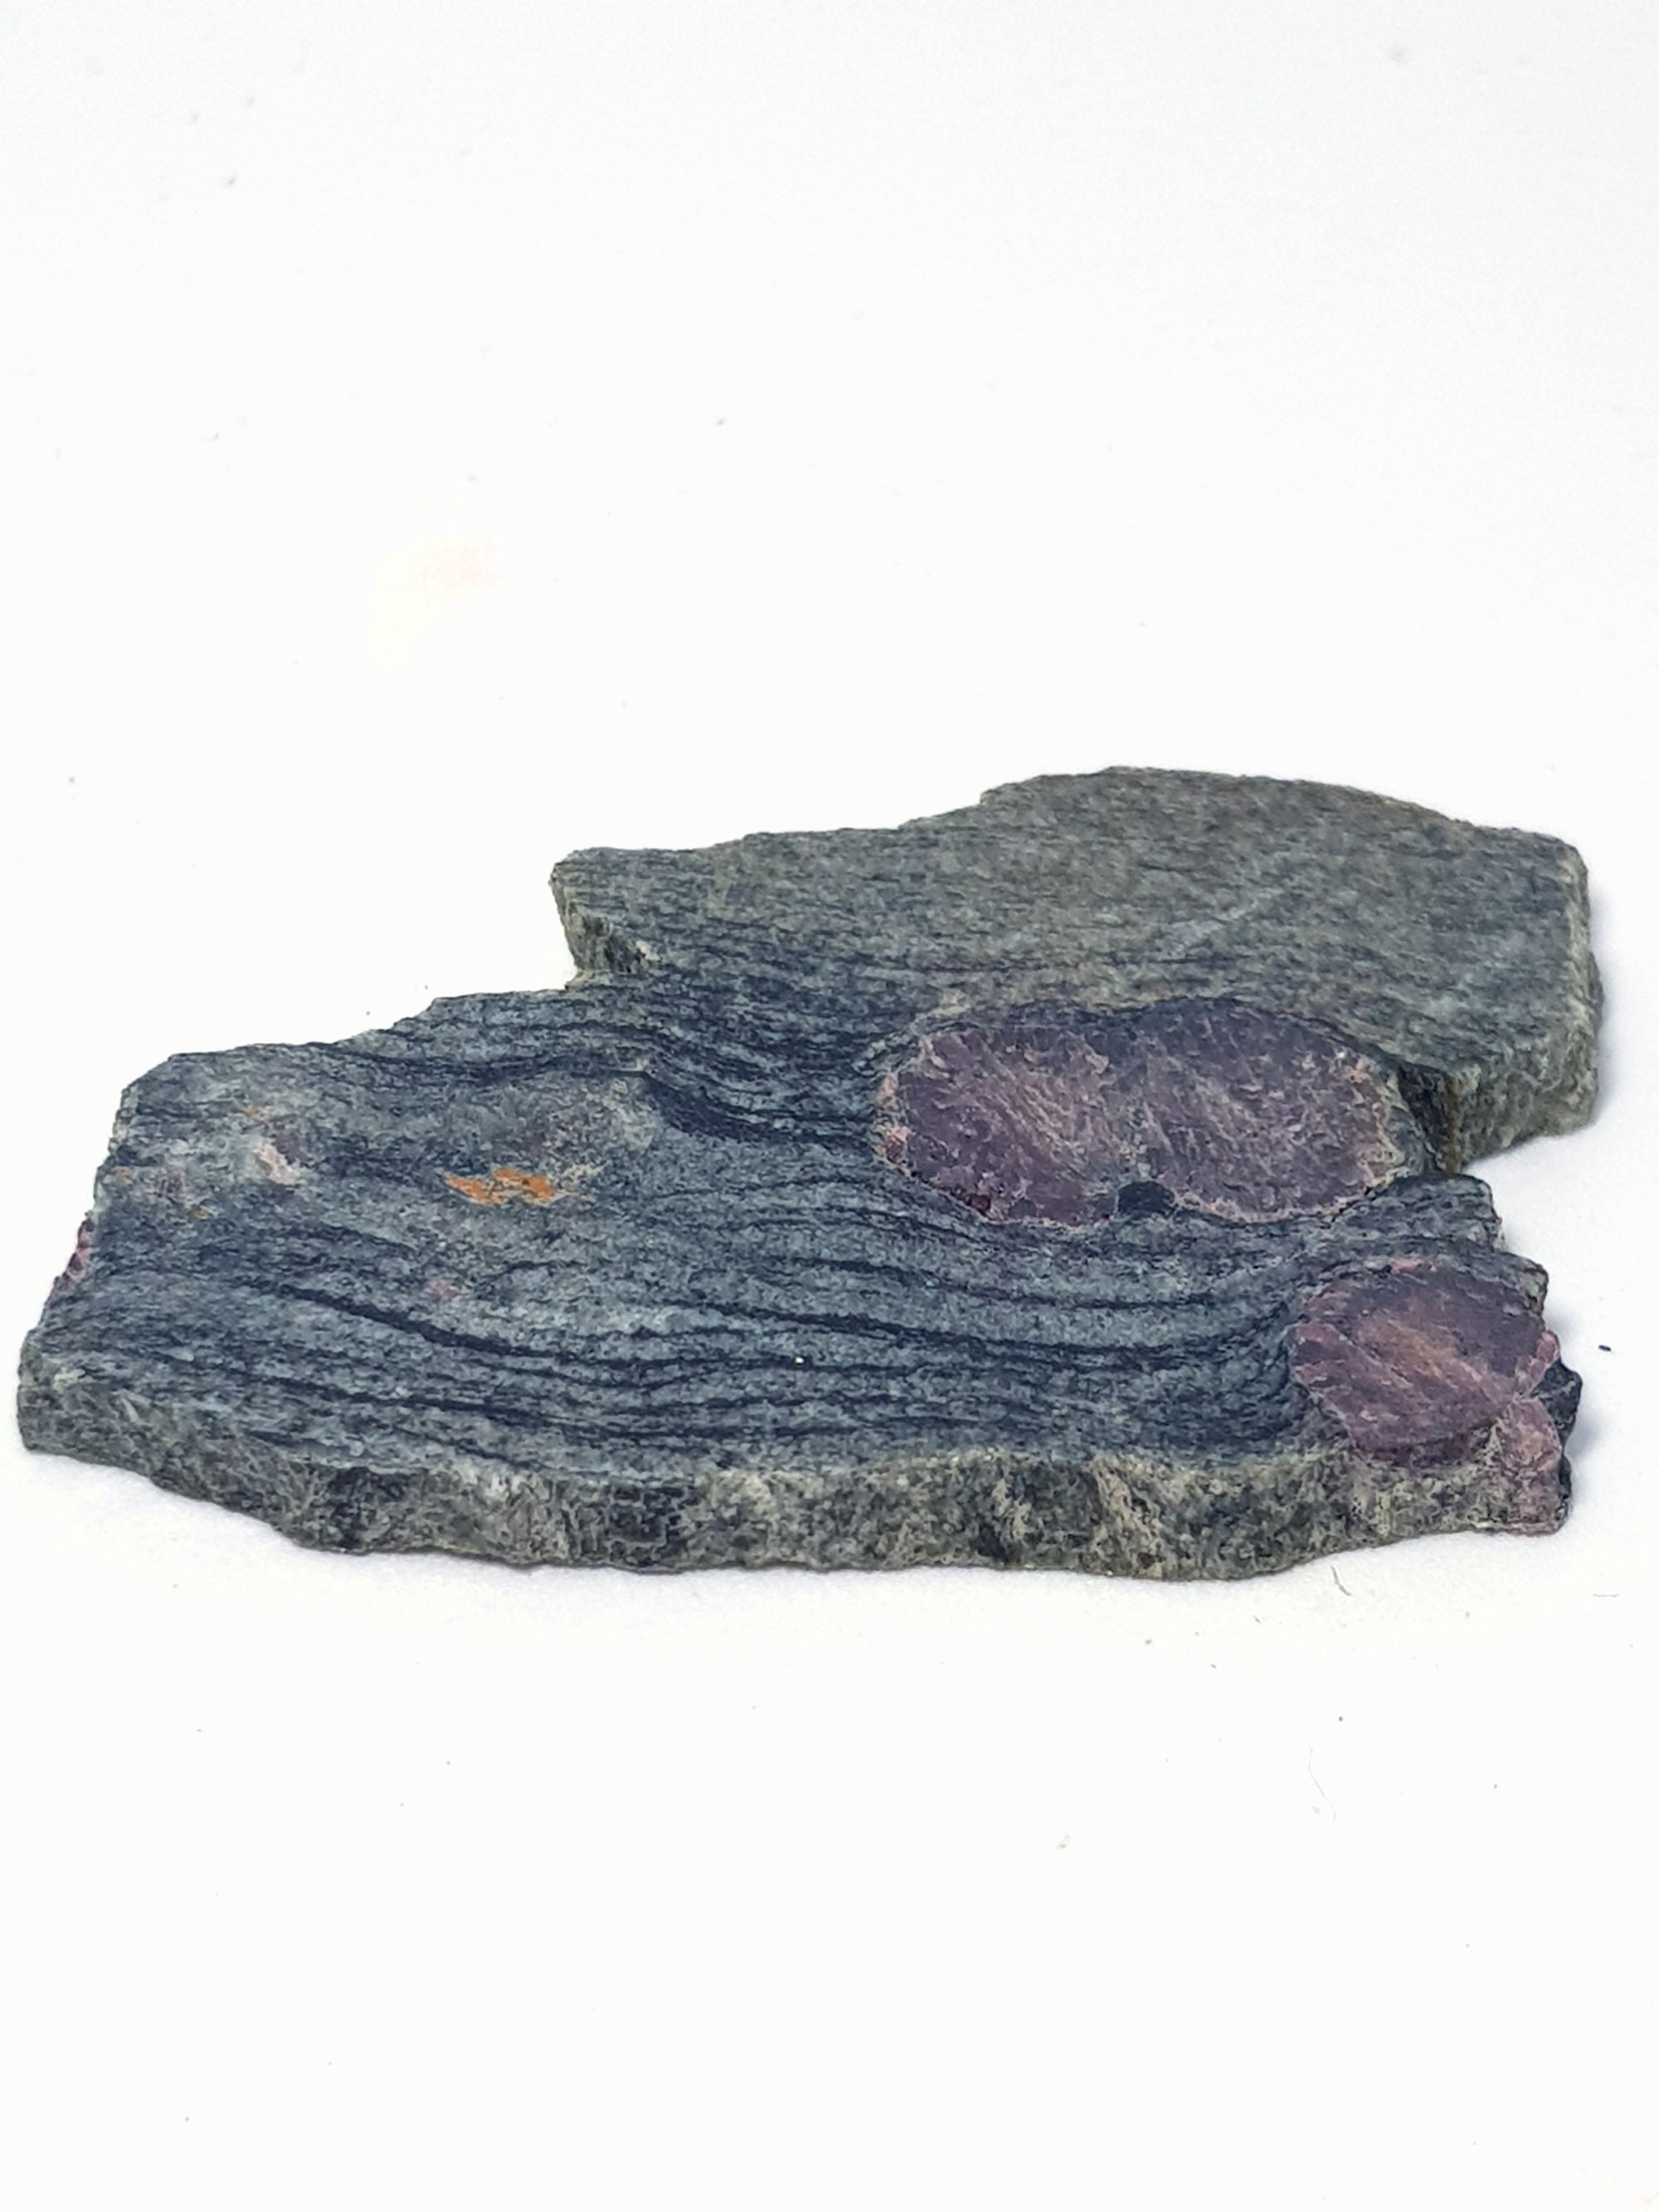 Garnets in Gneiss, from Isua, Greenland - The Science of Magic 